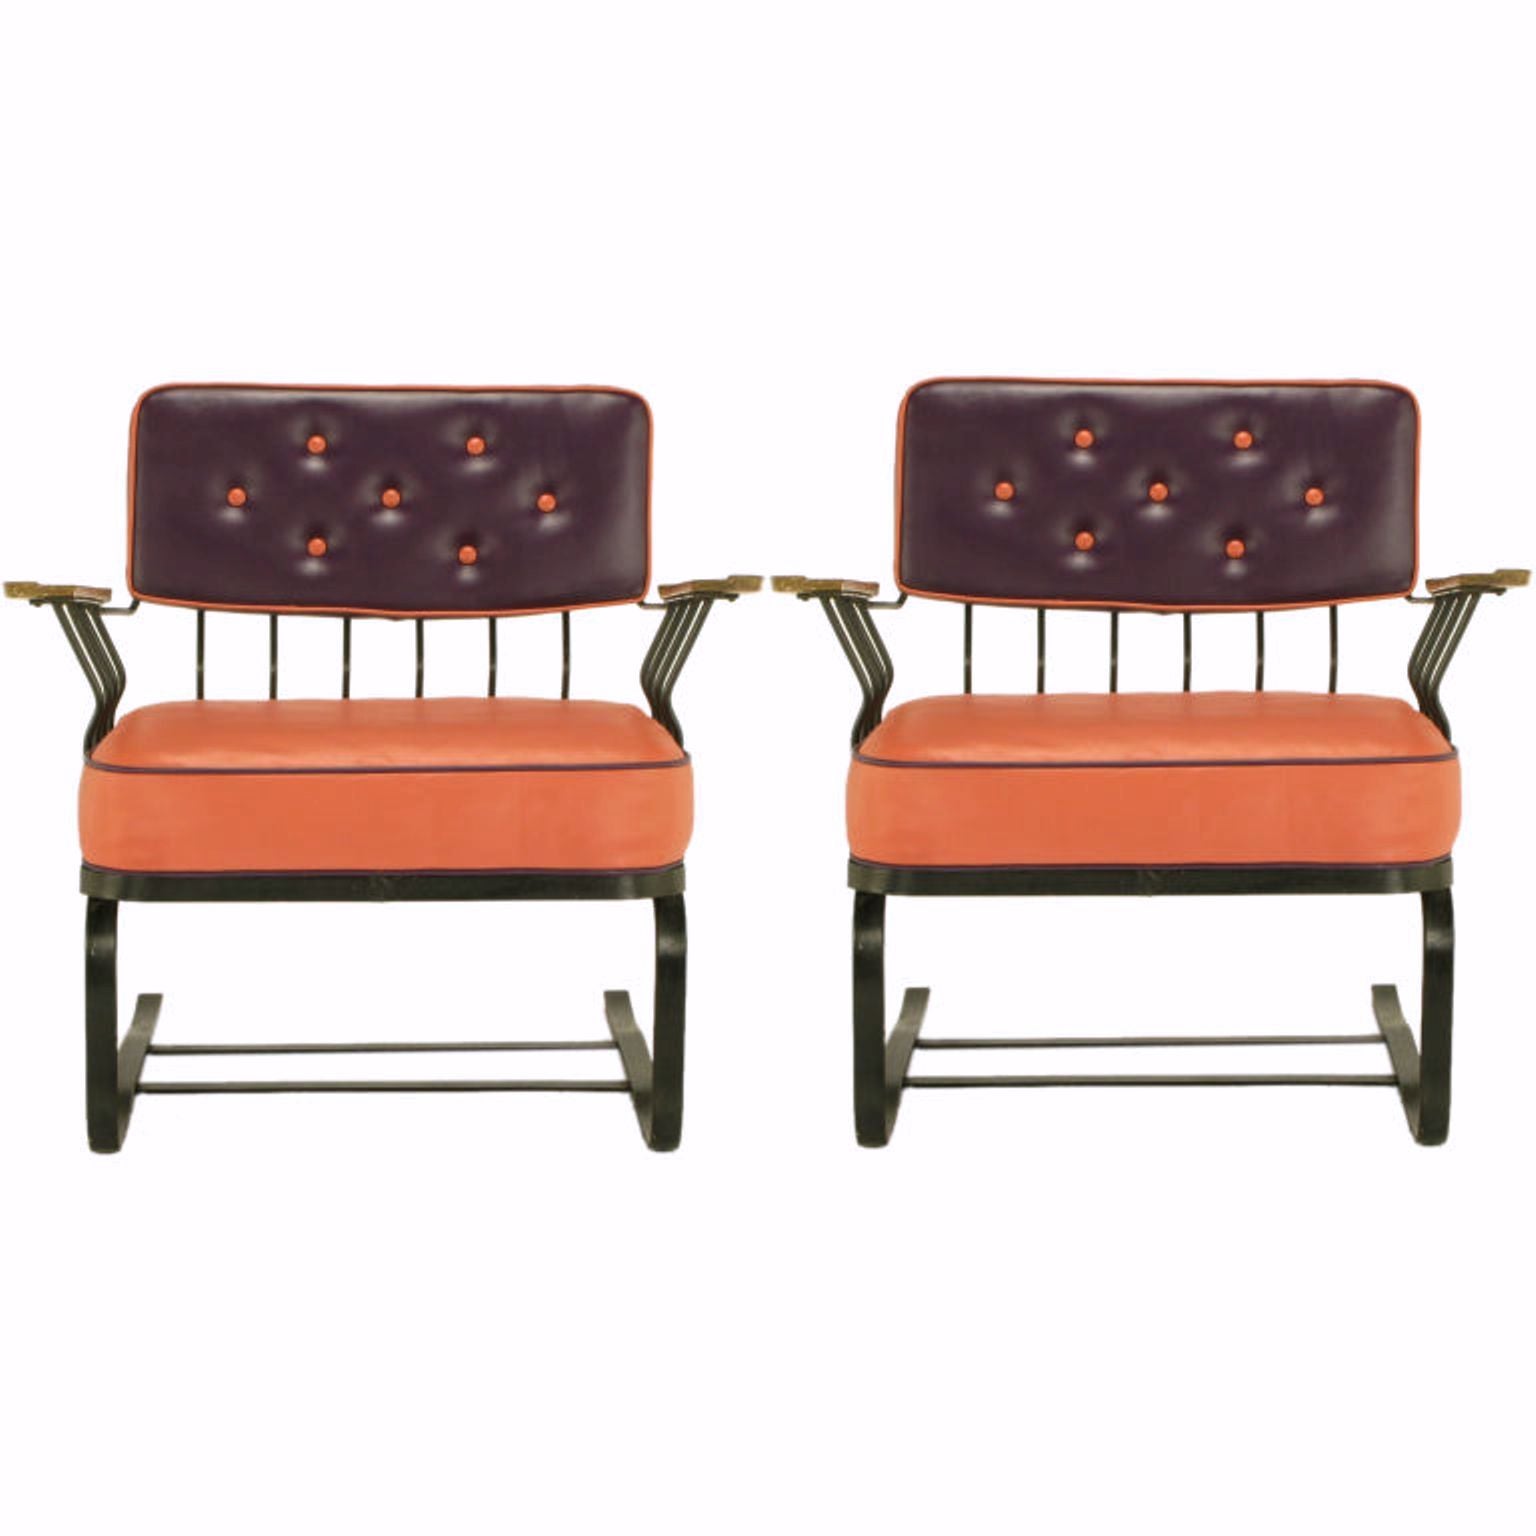 Pair of Woodard Cantilevered Wrought Iron Lounge Chairs